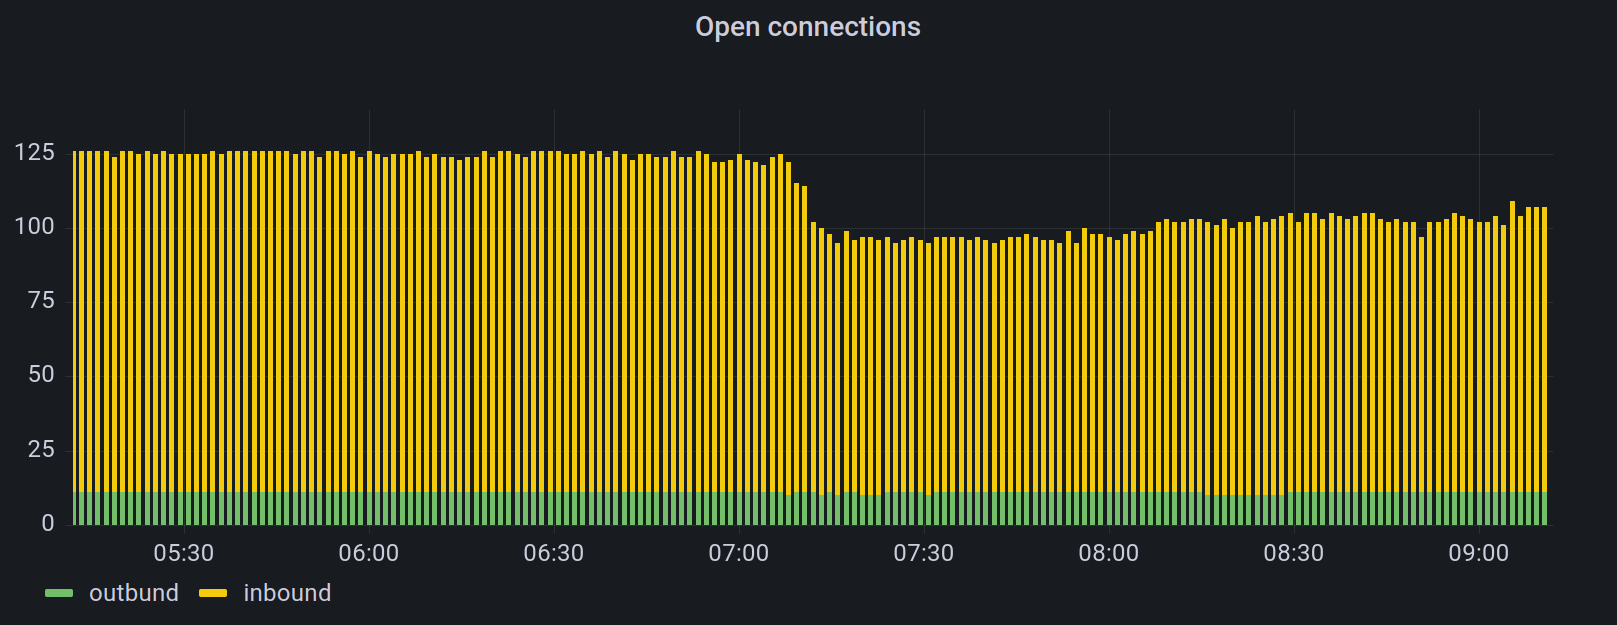 Showing a chart of number of open connection over time and Connections dropping around 7:00 am UTC.